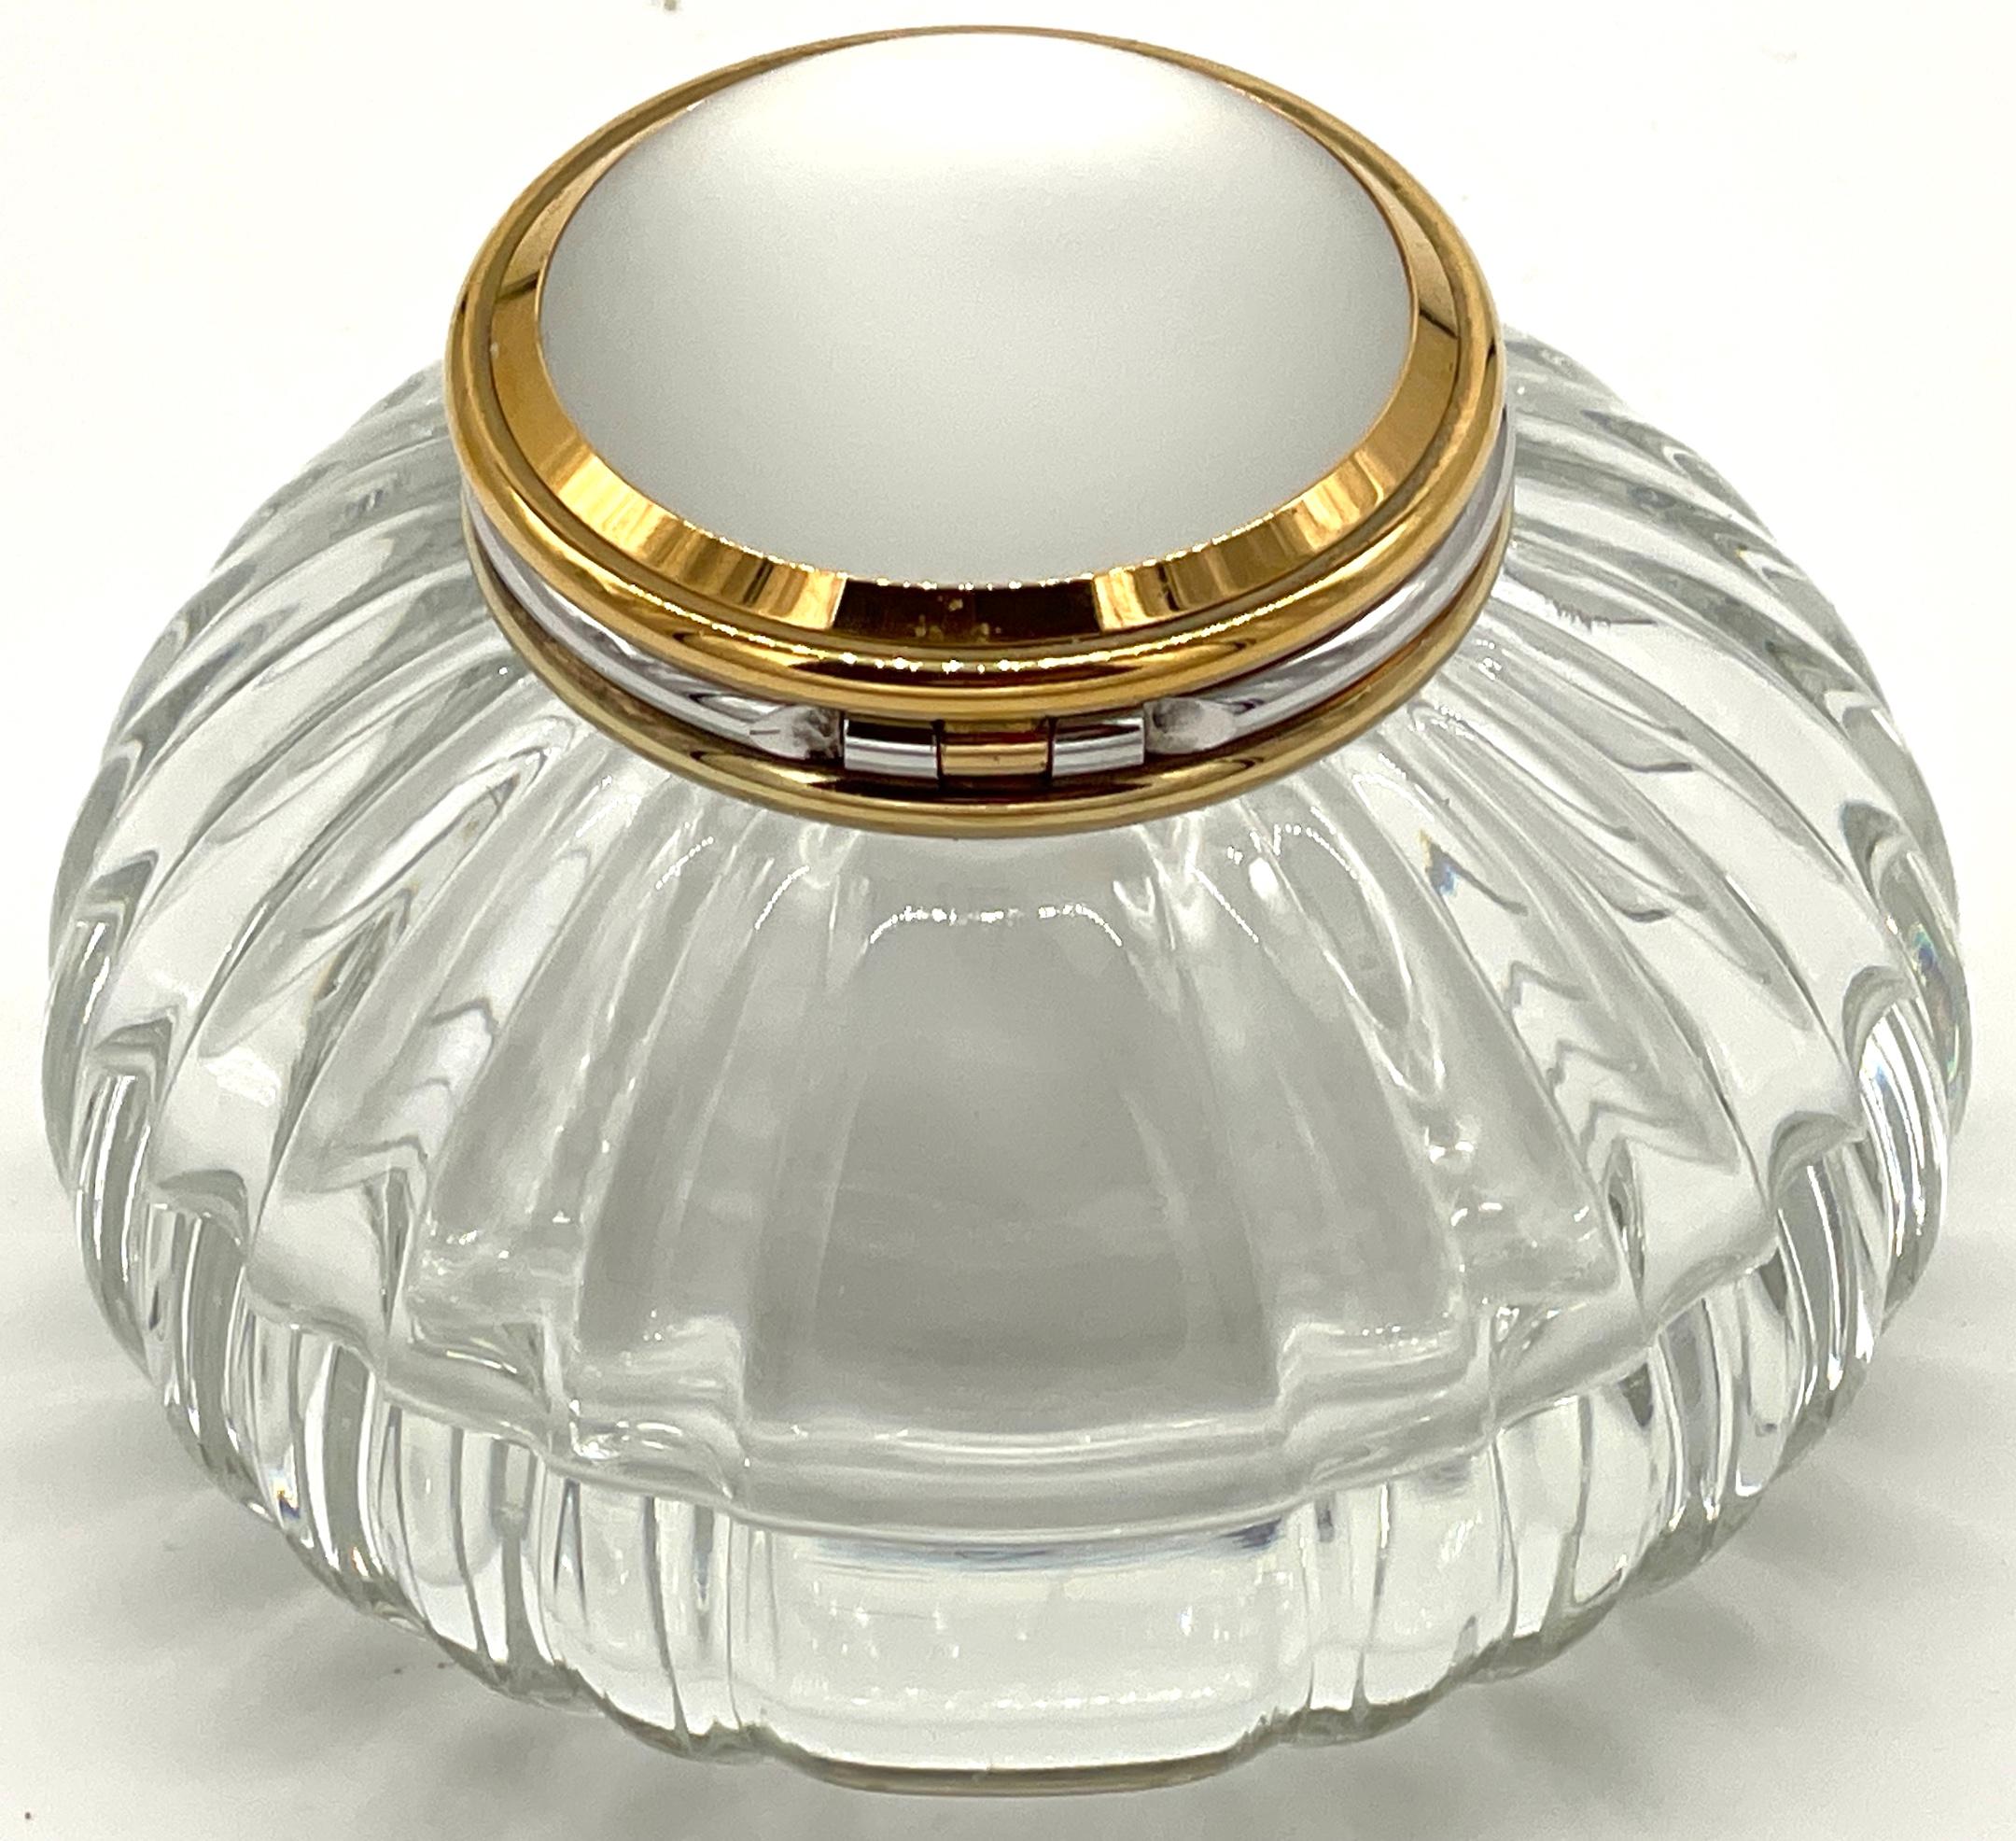 Enameled Cartier 'Must de Cartier' Crystal Gilt and Silver Mellon Inkwell For Sale